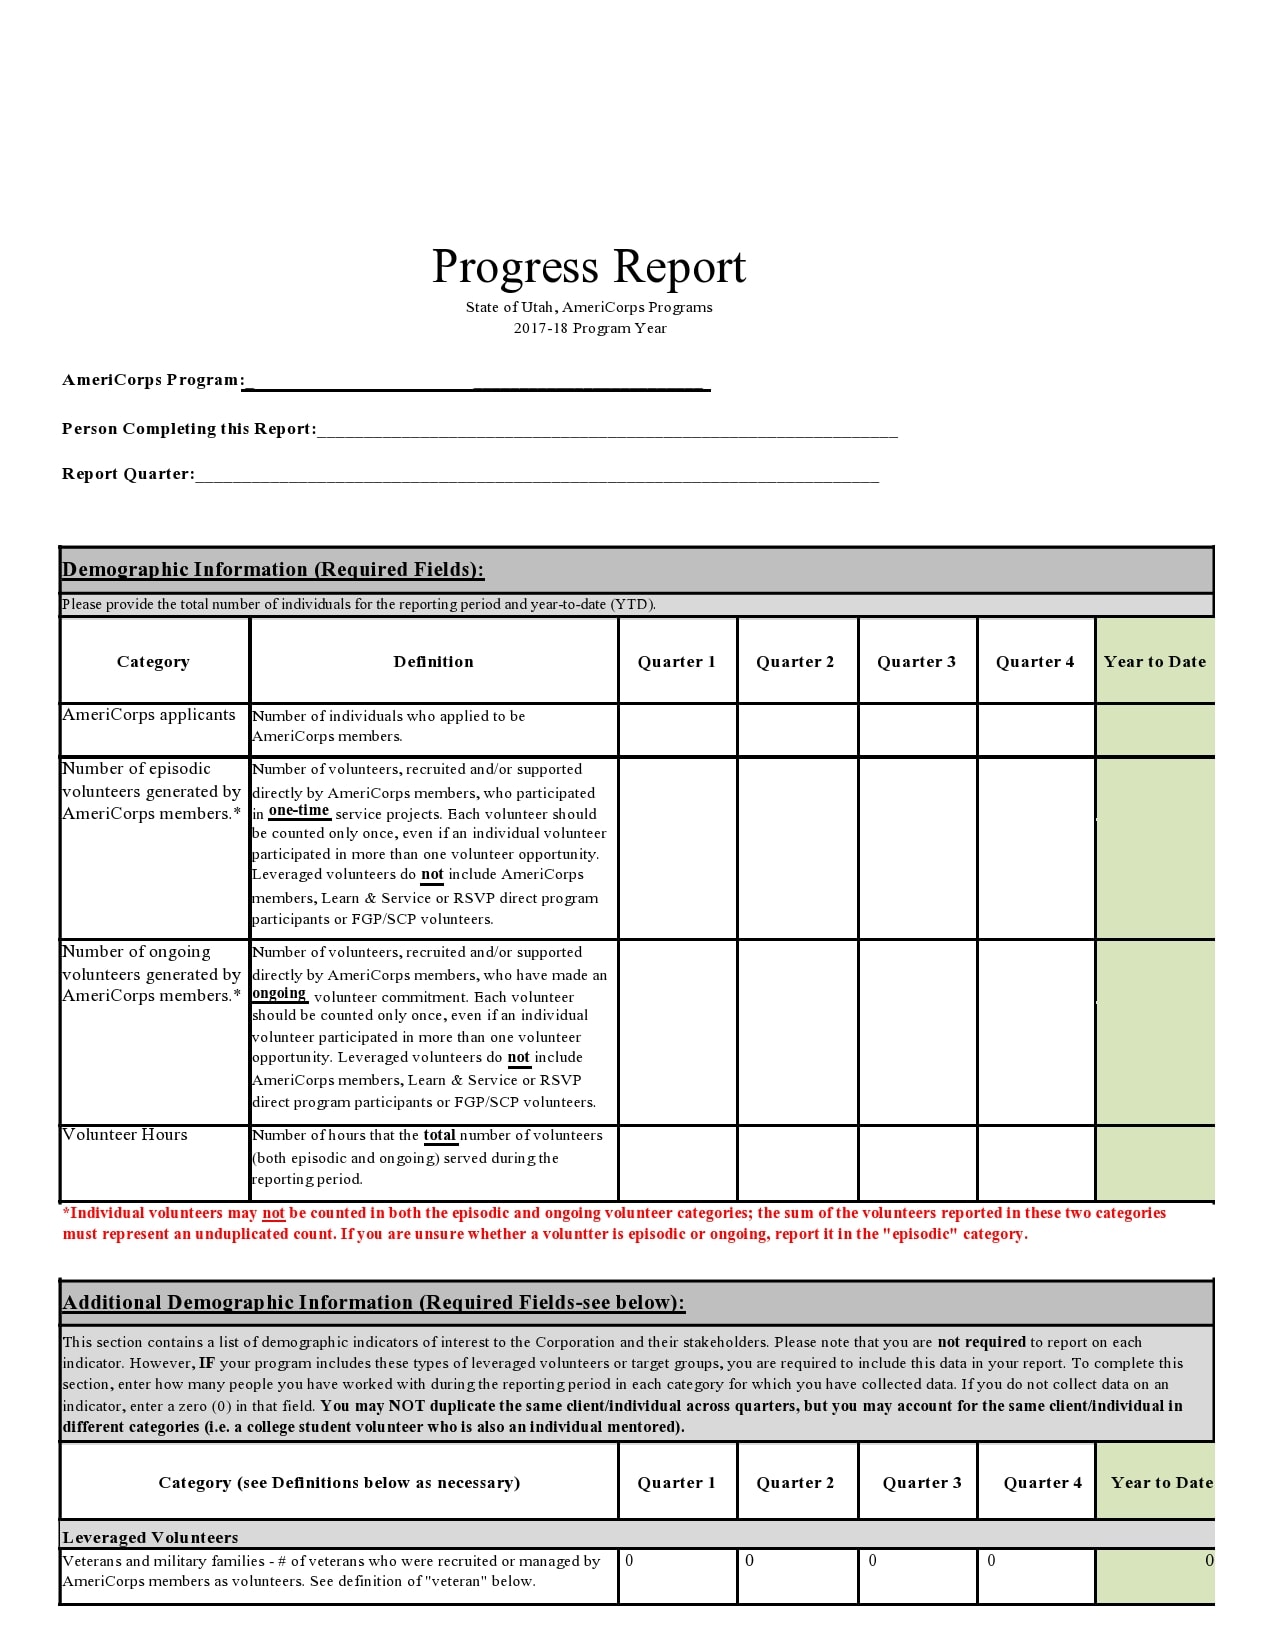 25 Professional Progress Report Templates (Free) - TemplateArchive Intended For Educational Progress Report Template